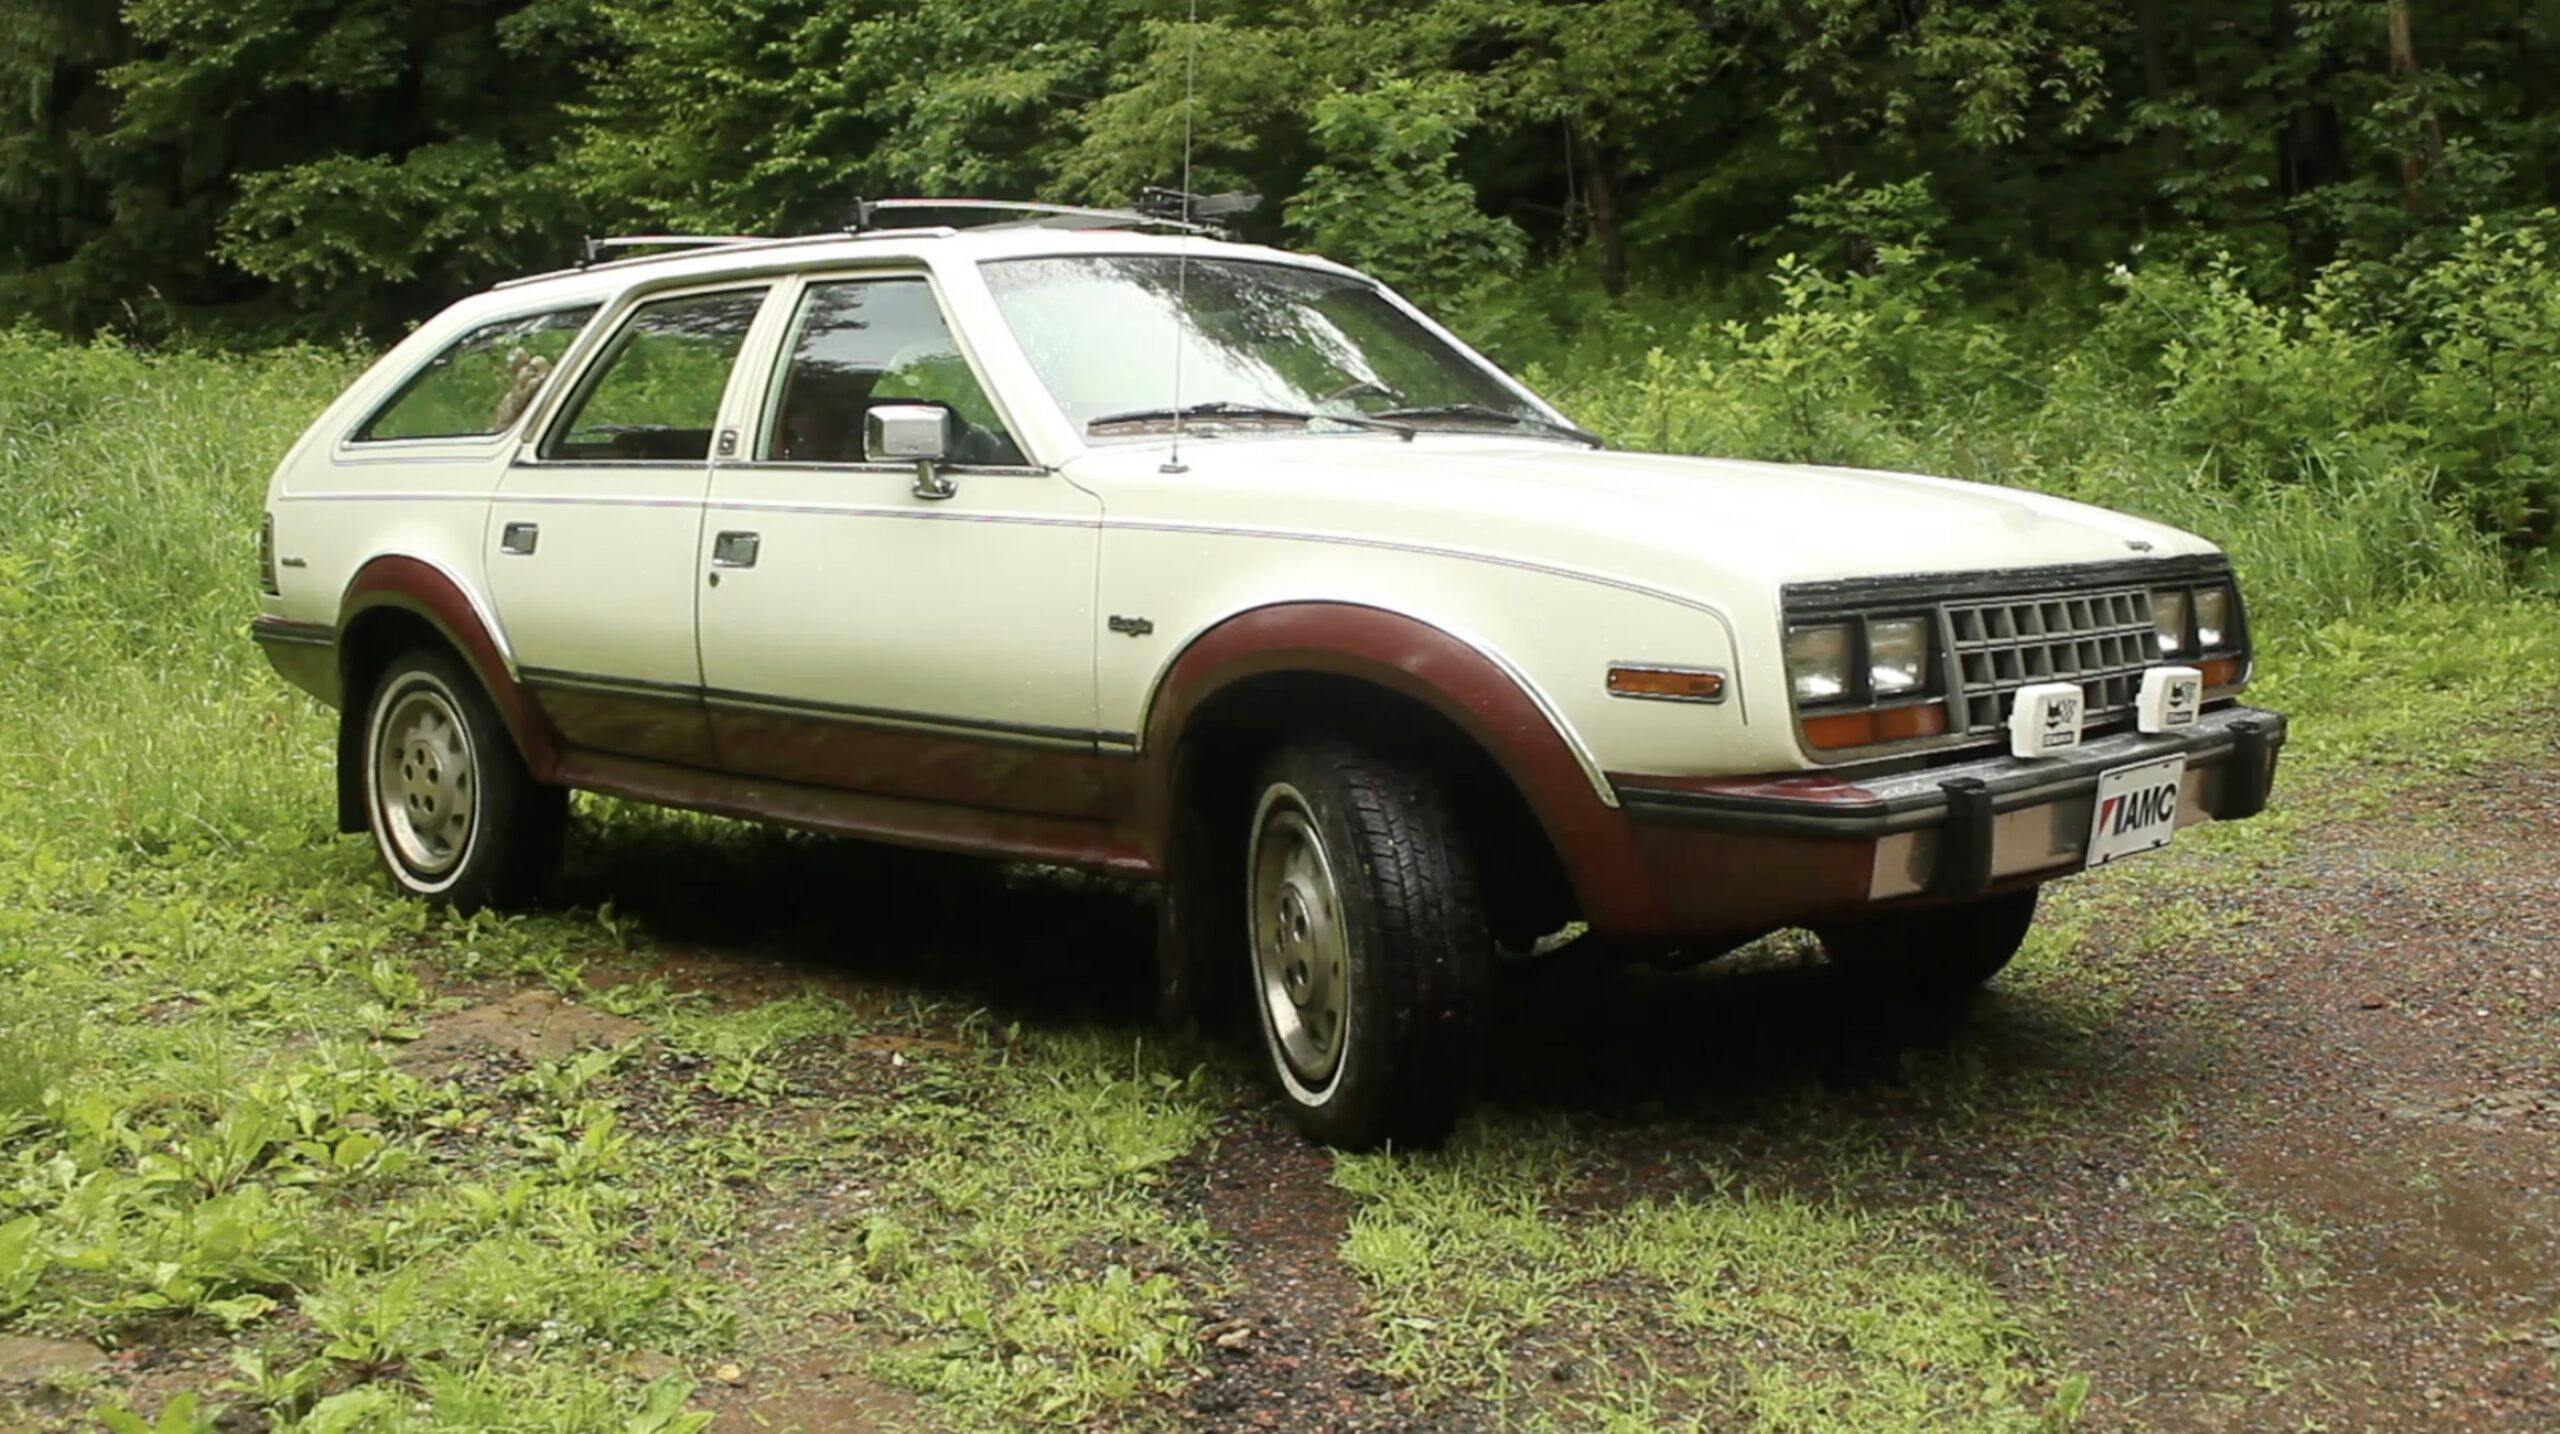 1986 AMC Eagle off road in the forest